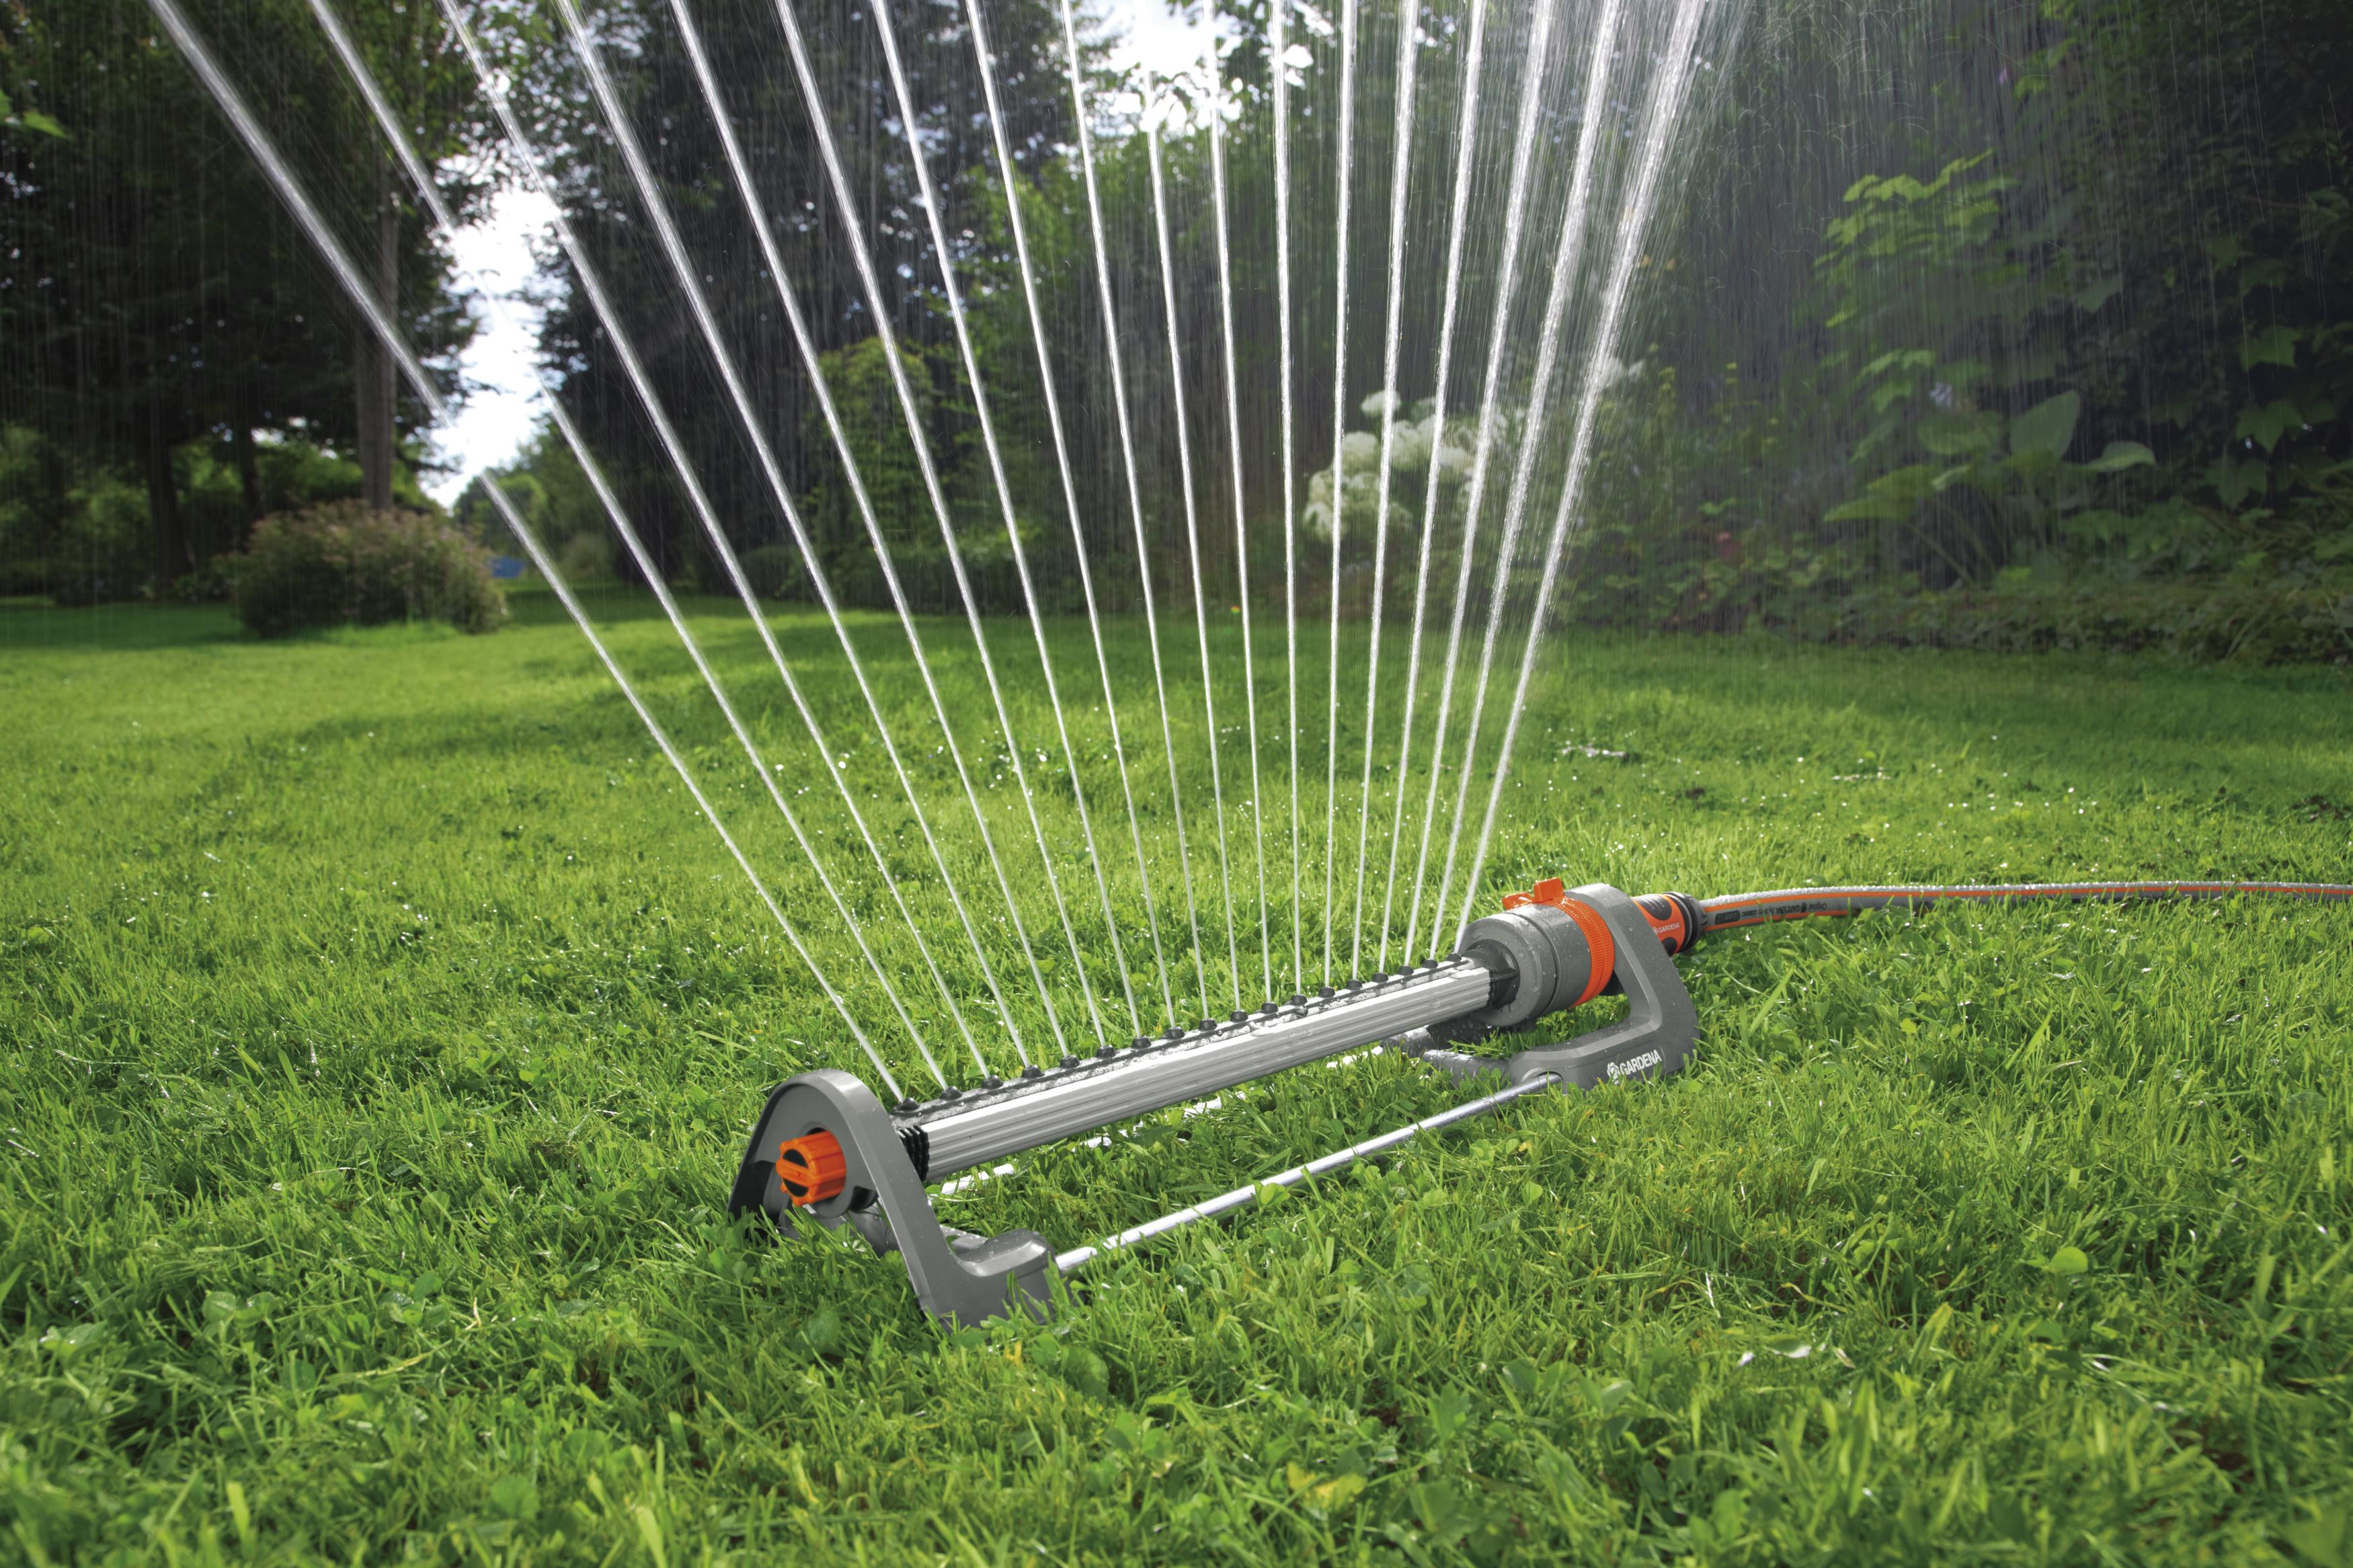 2084-20 sprinkling width of up to 16 m no maintenance due to steel filter GARDENA Classic Oscillating Sprinkler Polo 280: Lawn sprinkler for even watering of areas from 120-280 m/² range 8-18 m